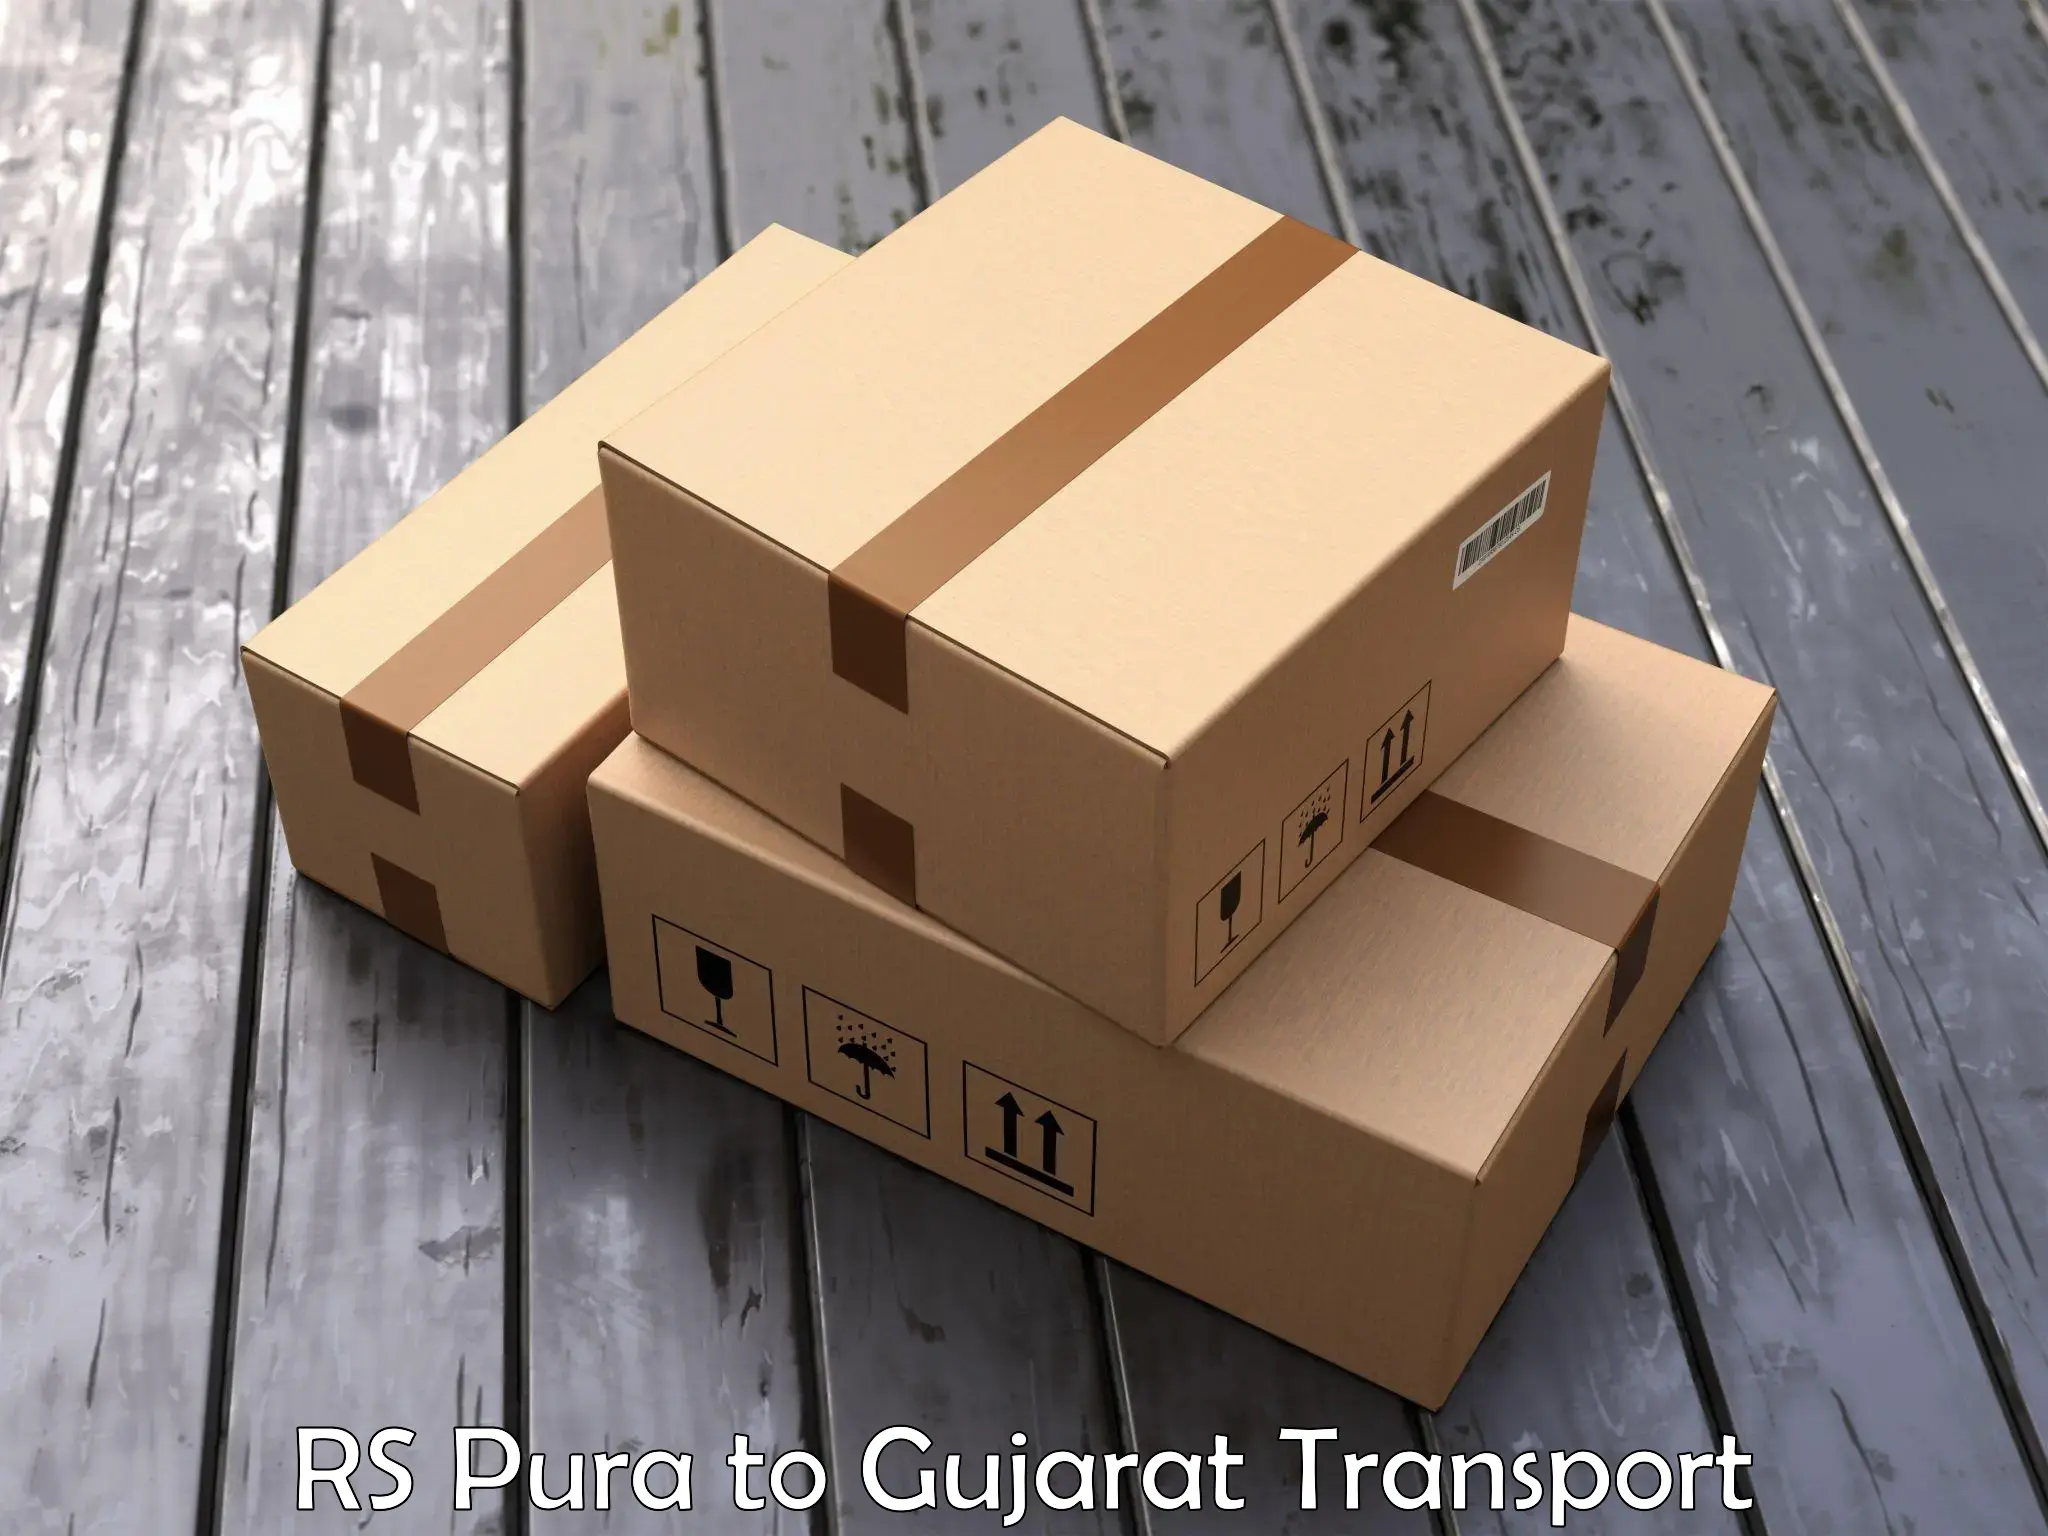 Express transport services RS Pura to Gujarat